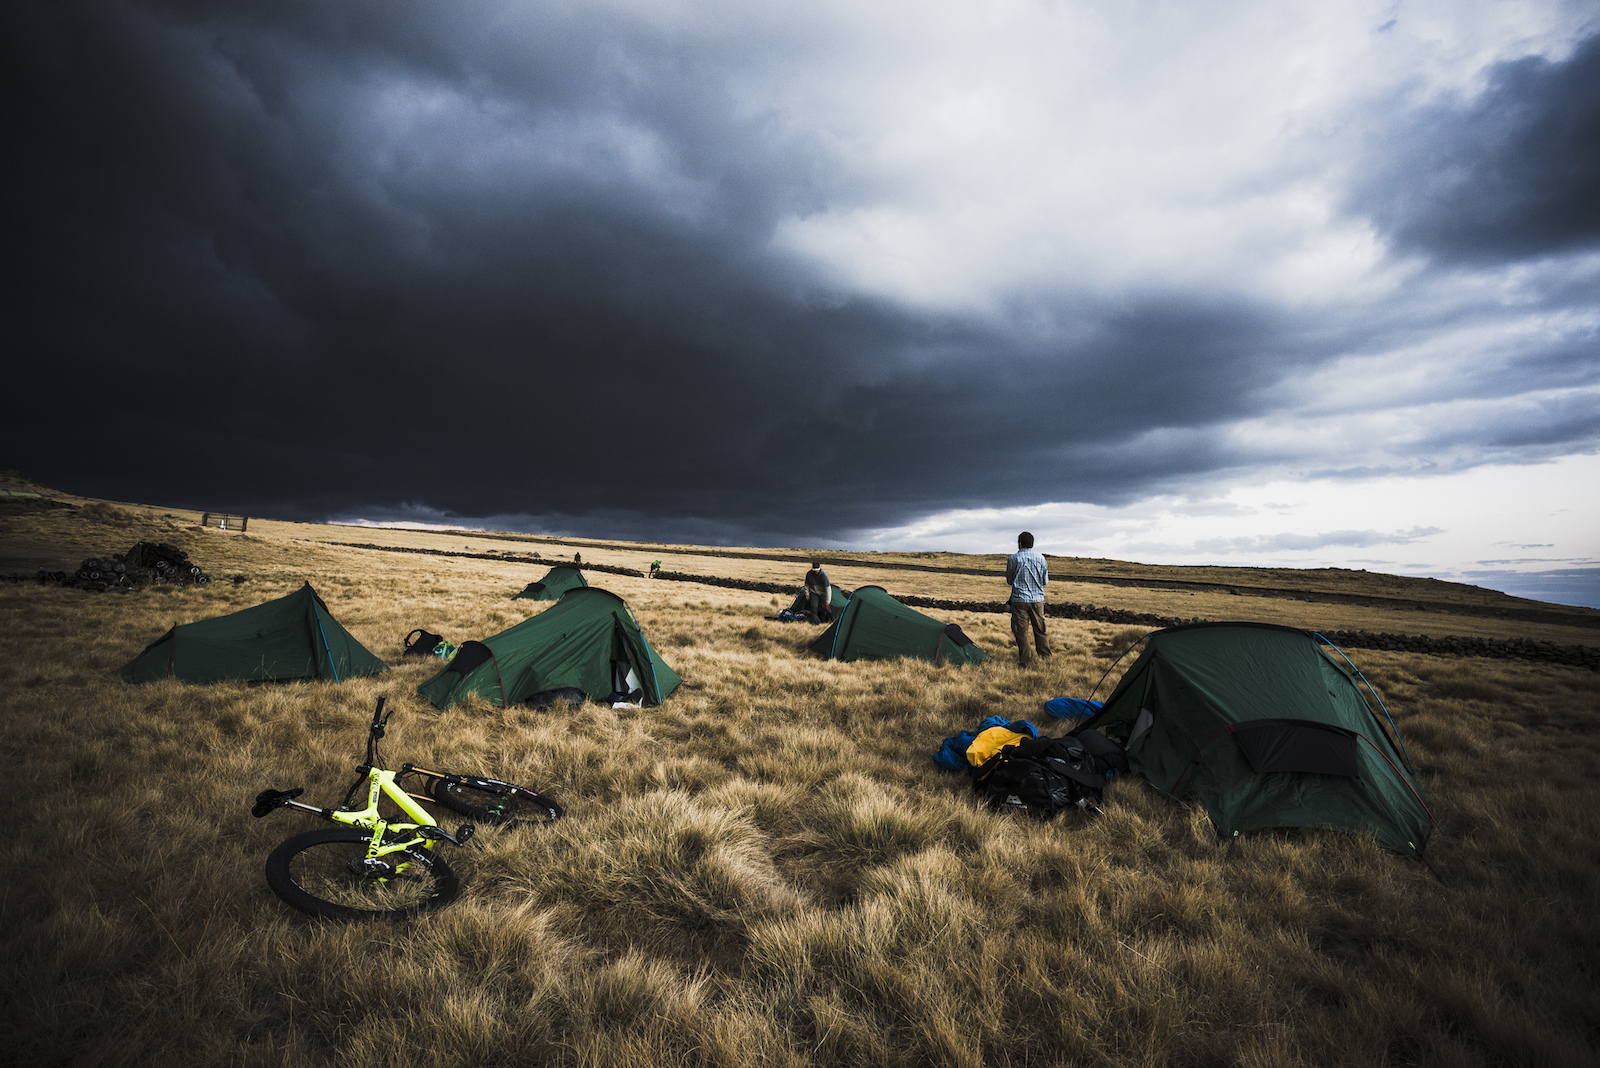 First night camp at 3600m